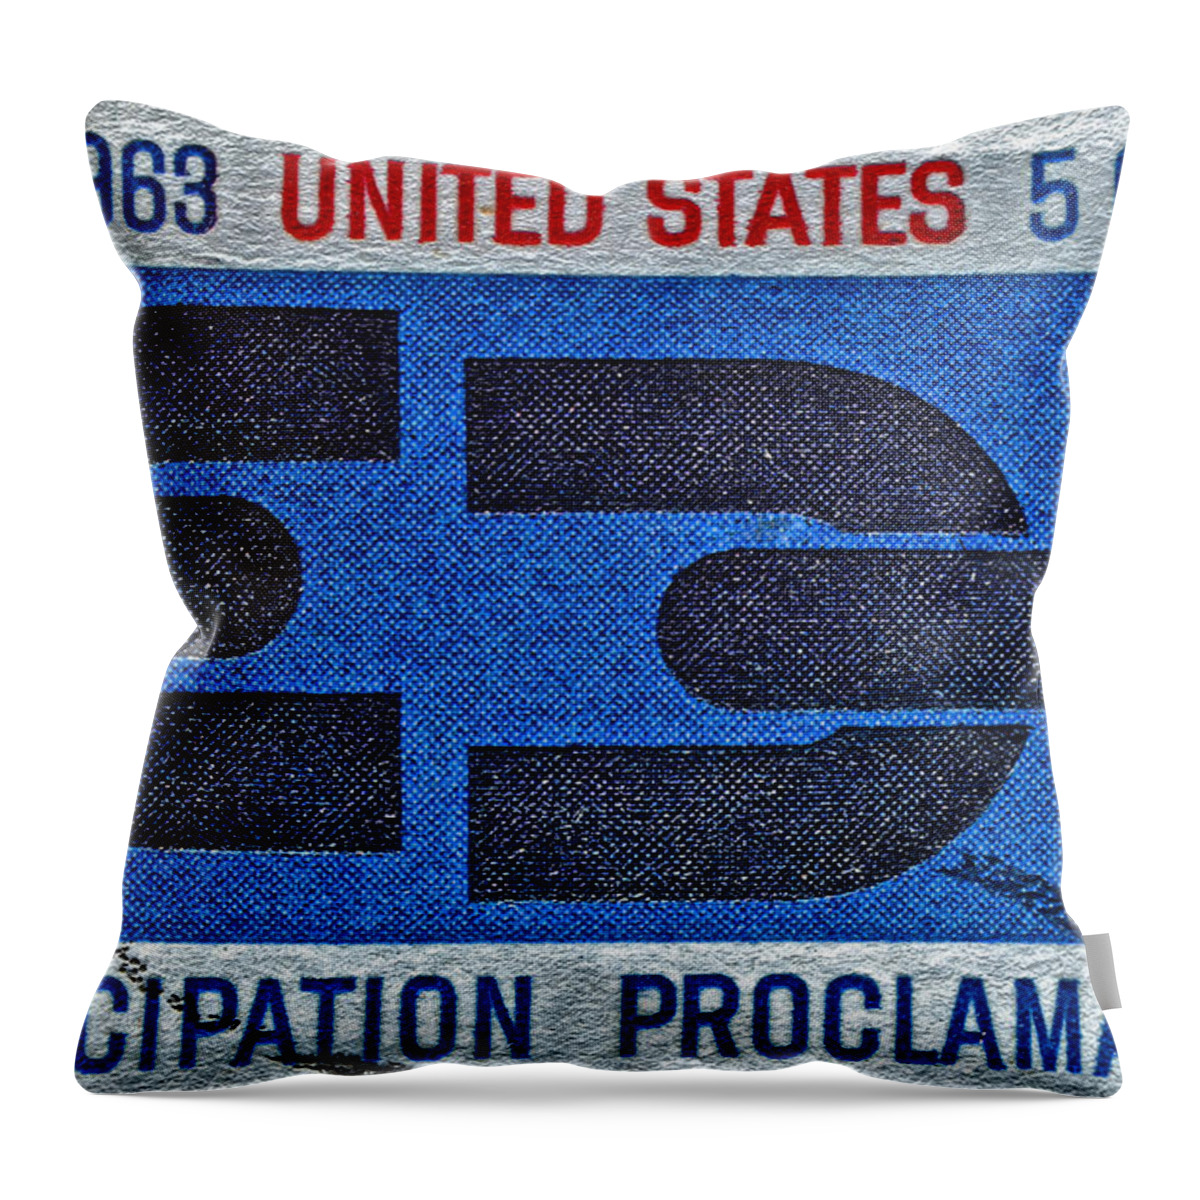 1963 Emancipation Proclamation Stamp Throw Pillow featuring the photograph 1963 Emancipation Proclamation Stamp by Bill Owen